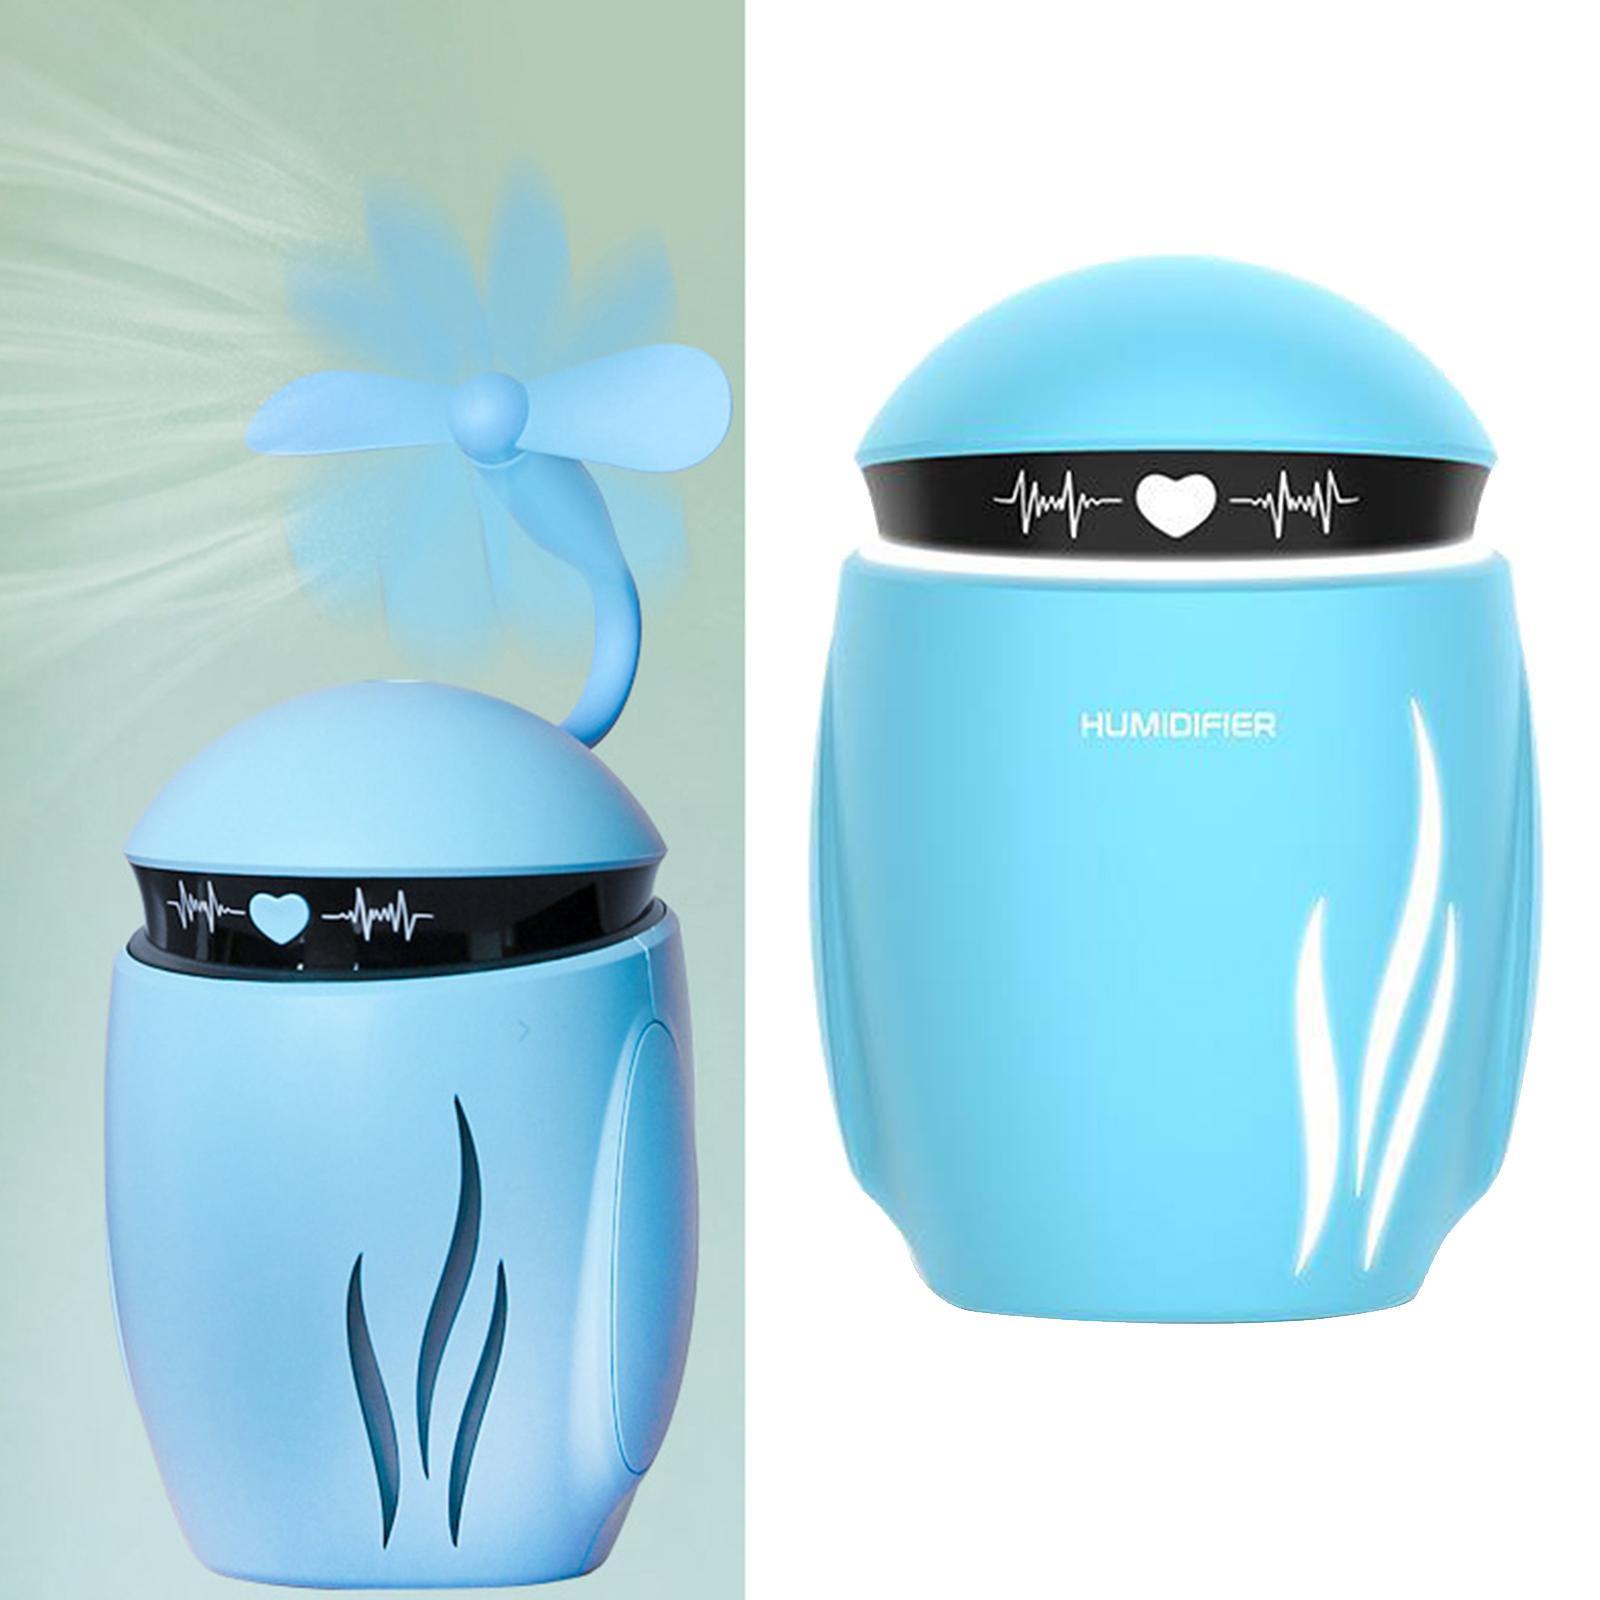 Portable Humidifier Aroma Diffuser USB Powered LED Light Mist Purifier Blue